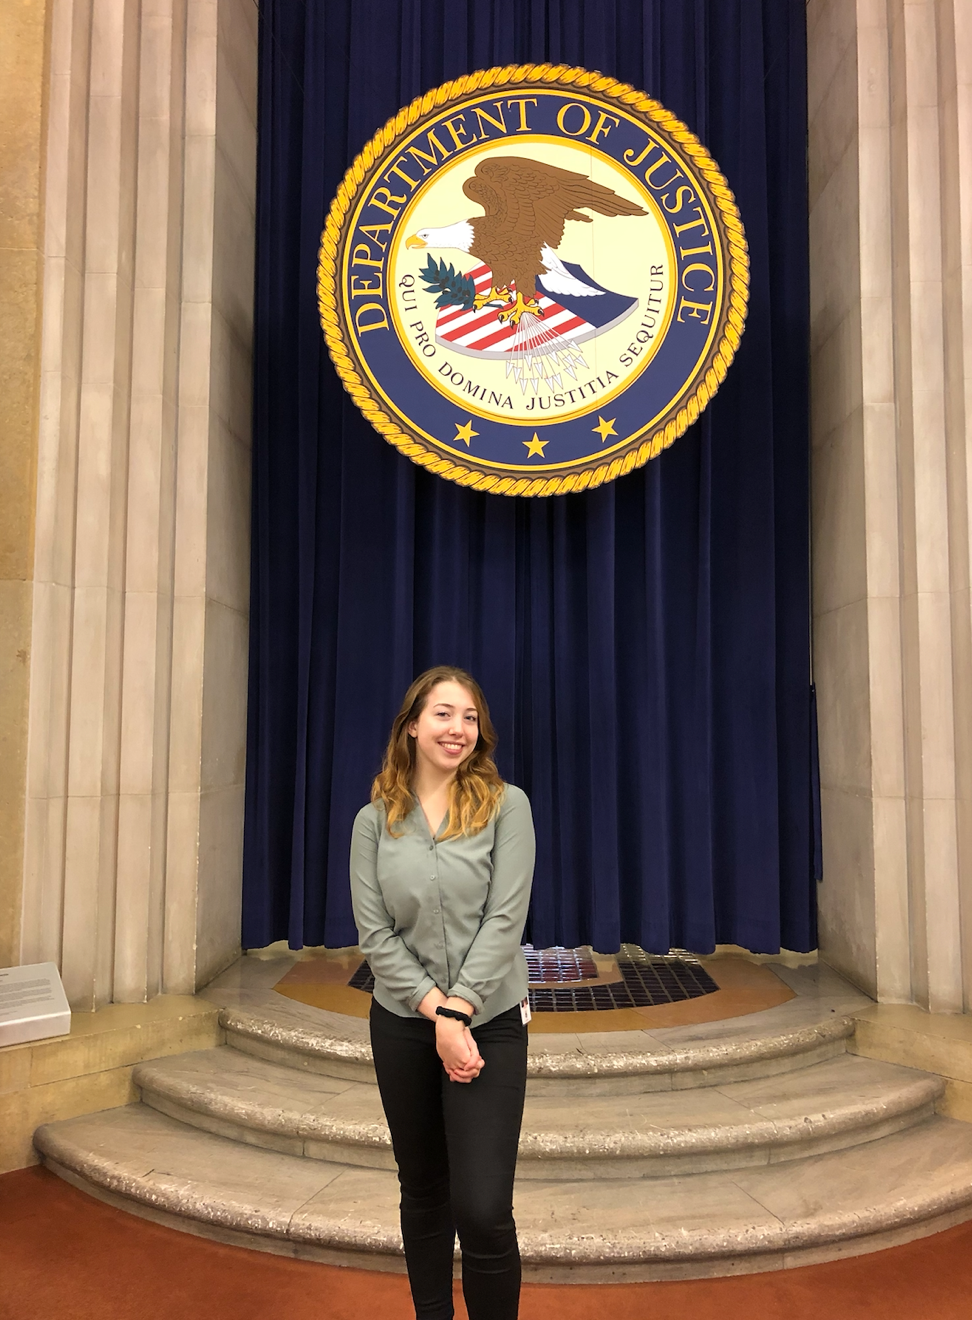 Picture of Ruby standing in front of the Department of Justice